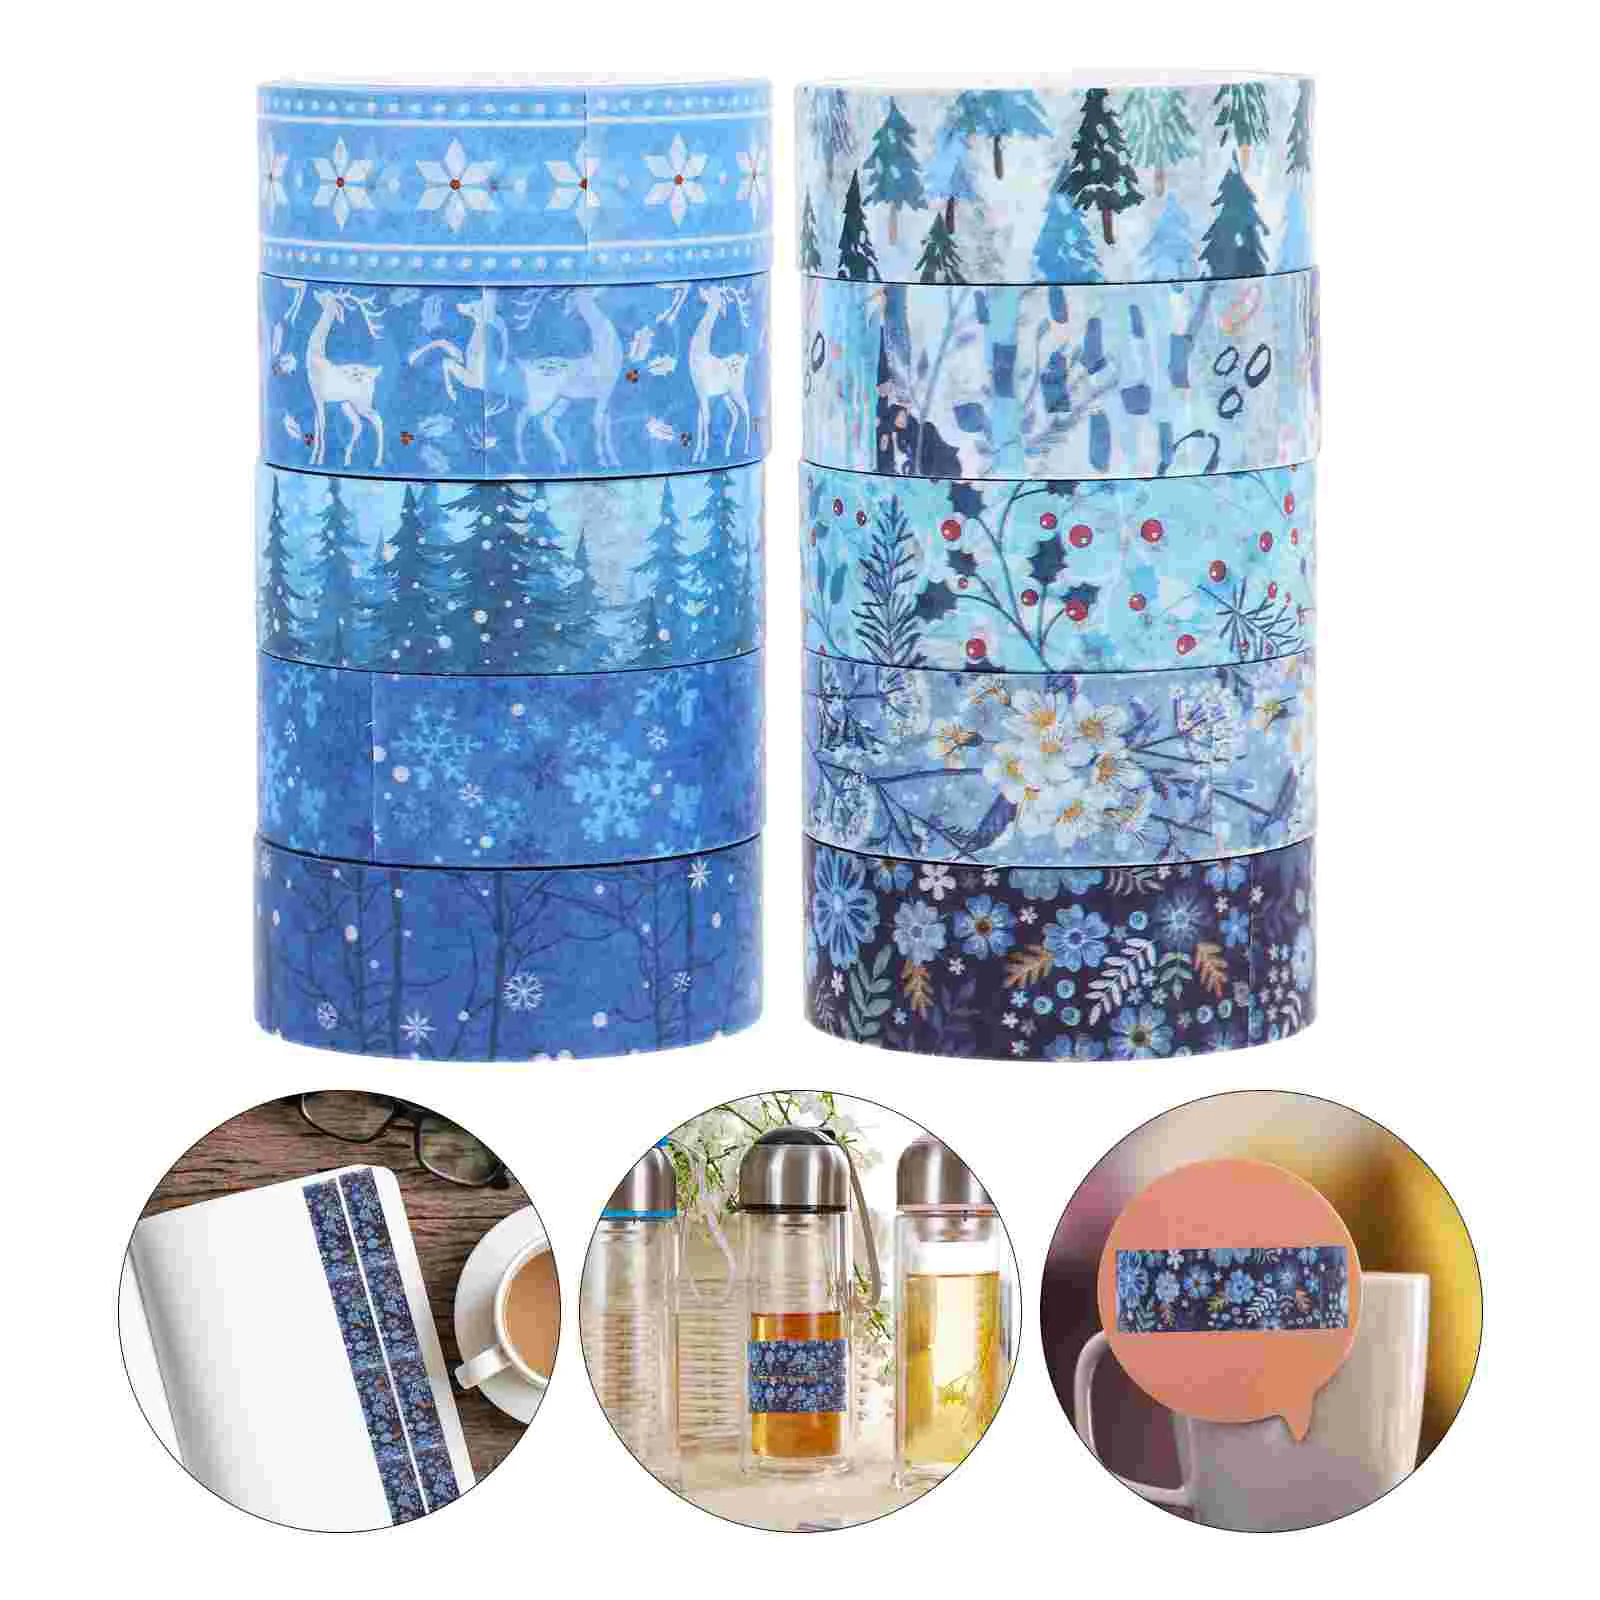 

10 Rolls Christmas Decor Washi Tape Journaling Hand Account Tapes Decorative Cute Winter Japanese Paper Thin